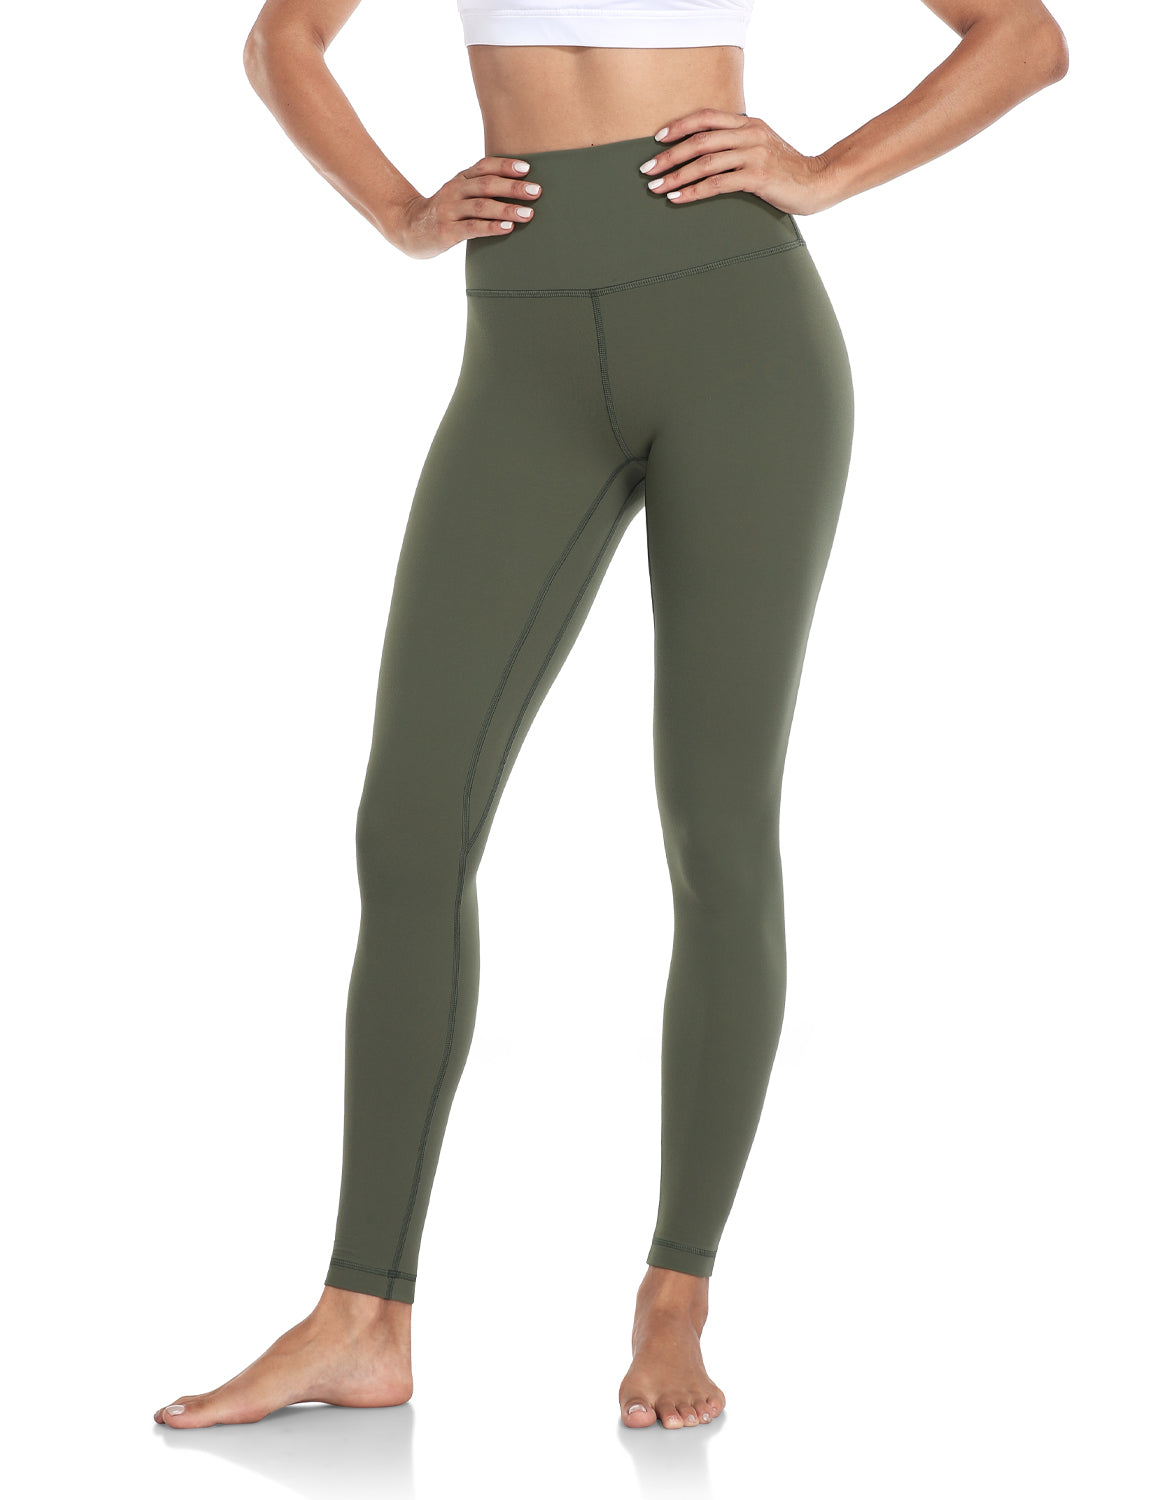 HeyNuts Essential/Work Out Full Length Yoga Leggings, Women's High Waisted  Workout Compression Pants 28'' [Video] [Video]